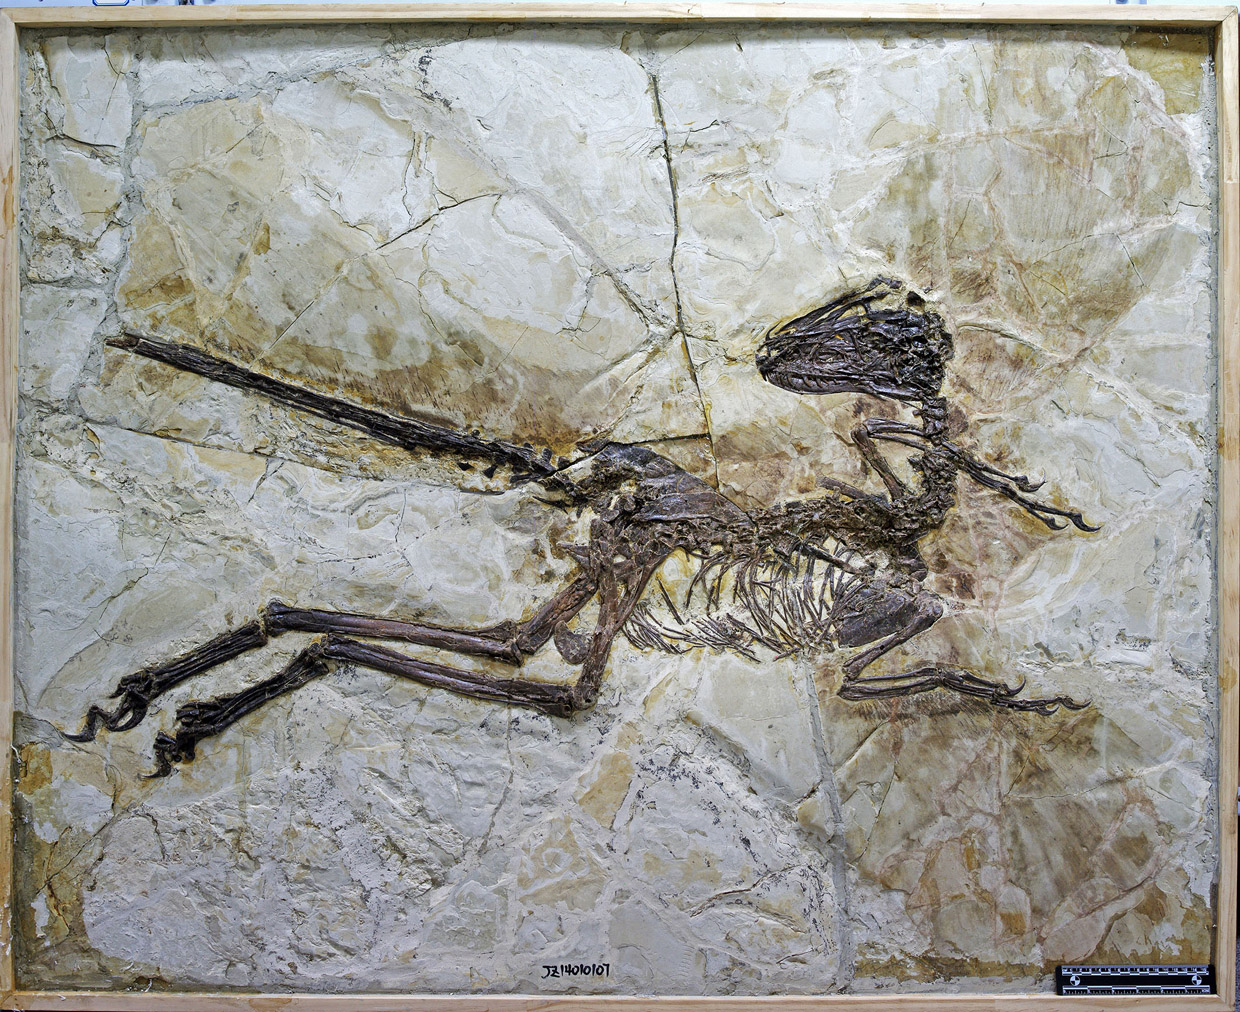 This is an image provided by University of Edinburgh taken in Jinzhou, China, in 2014 and released on Thursday July 16, 2015 of the fossil of a new species of dinosaur named Zhenyuanlong suni.